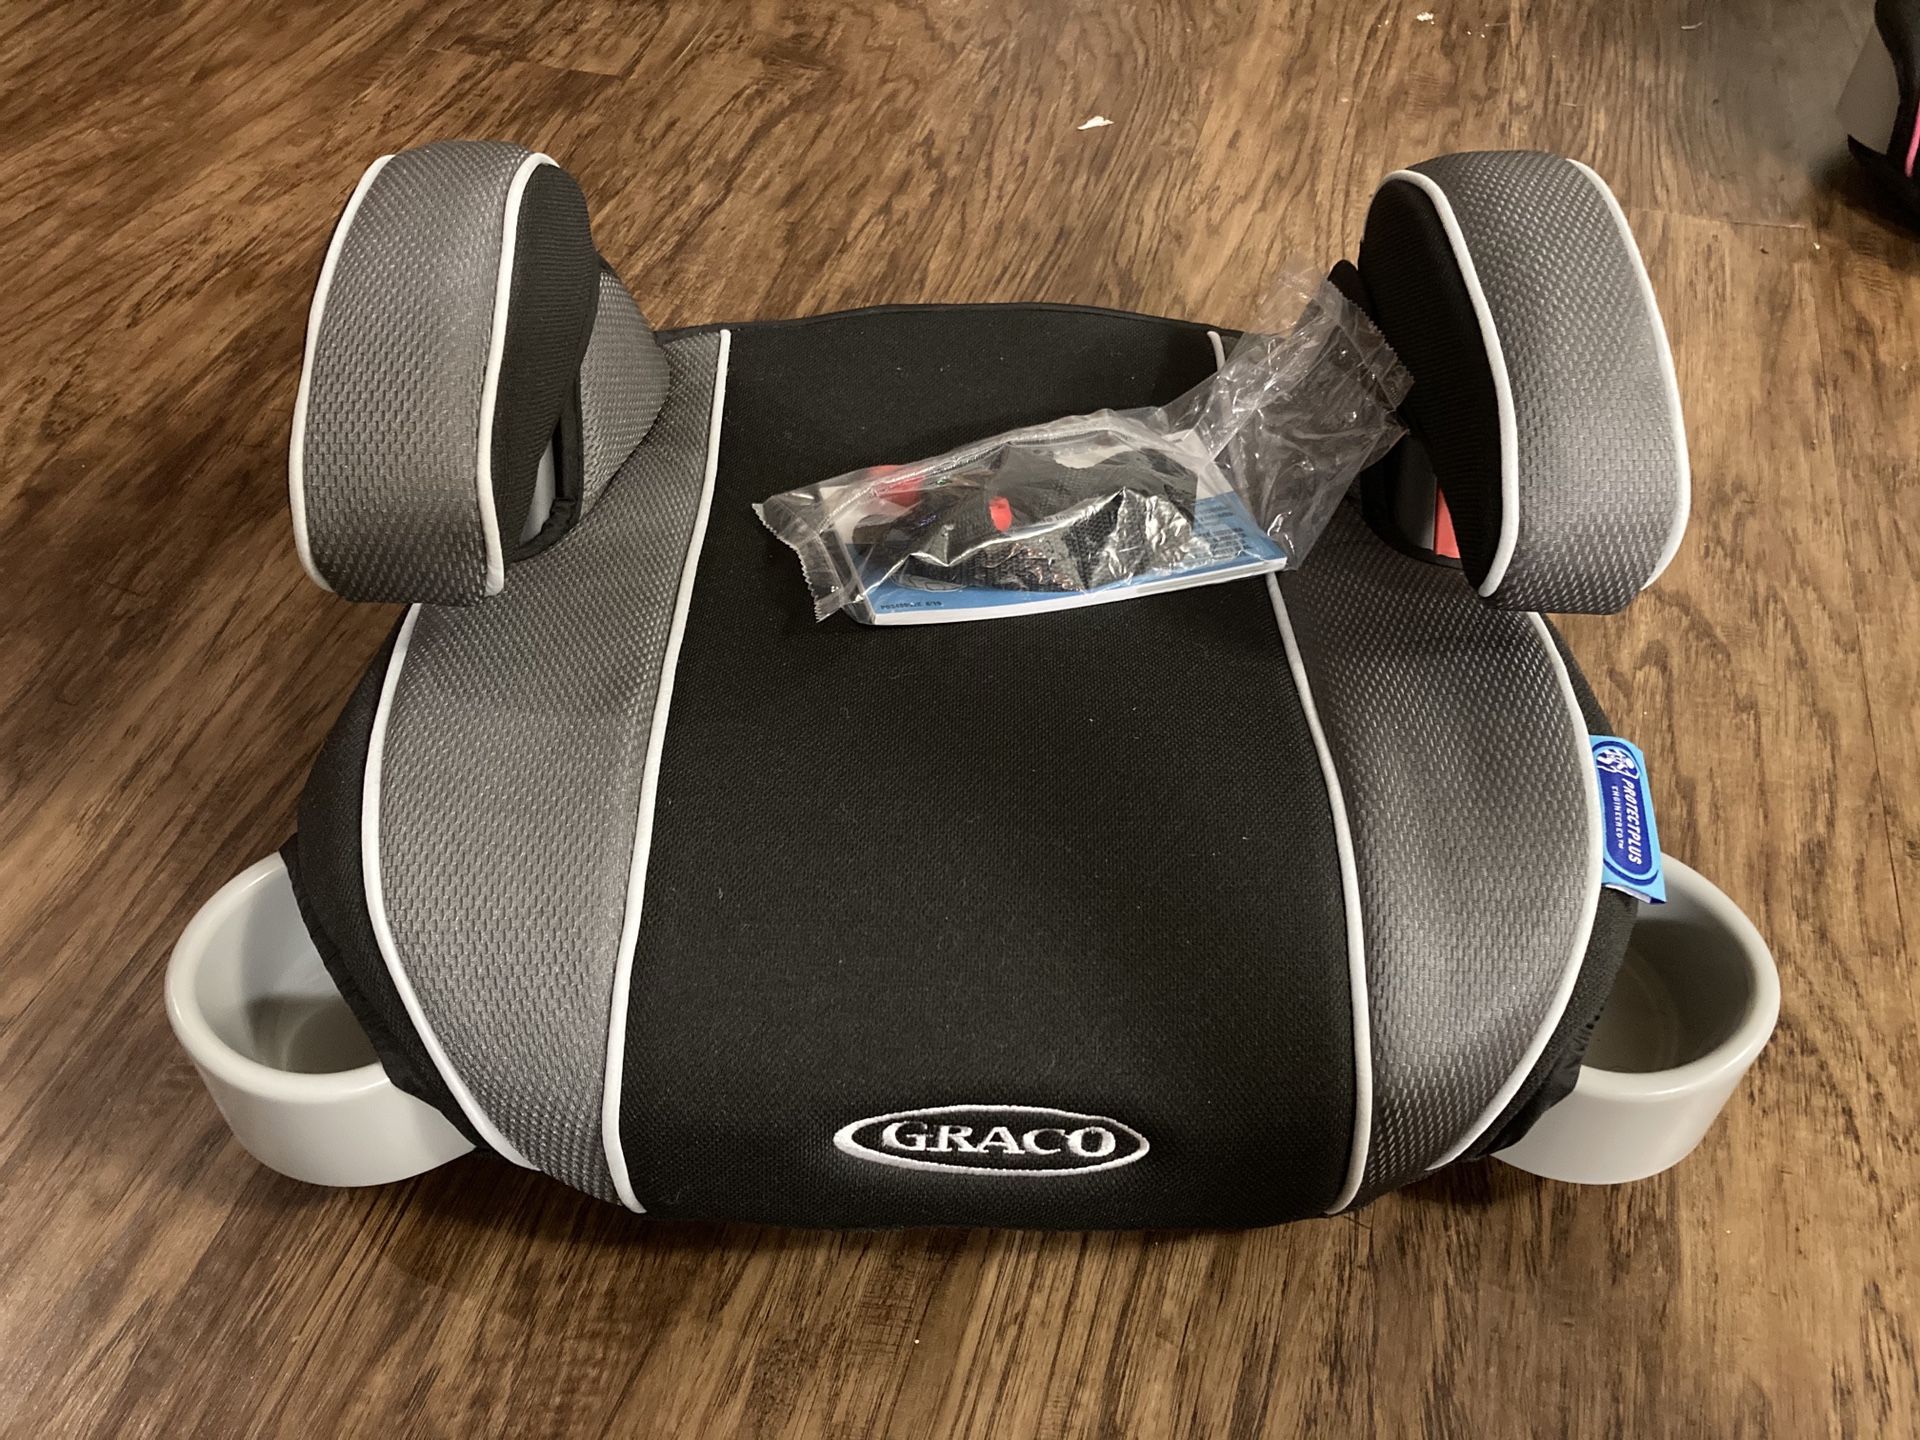 GRACO - Booster backless child seat (NEW)